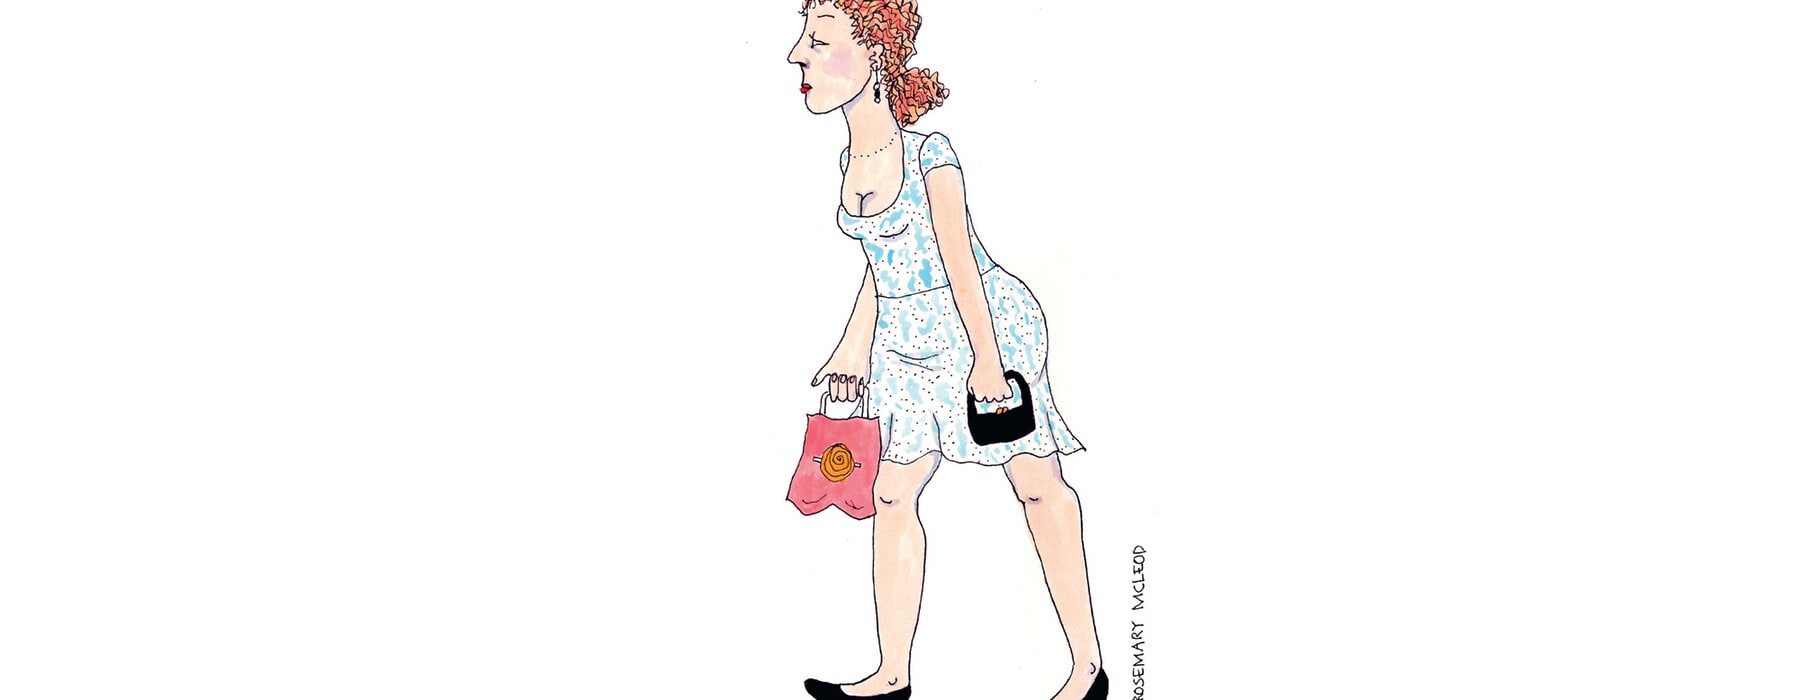 Illustration by Rosemary McLeod of woman walking in high heels